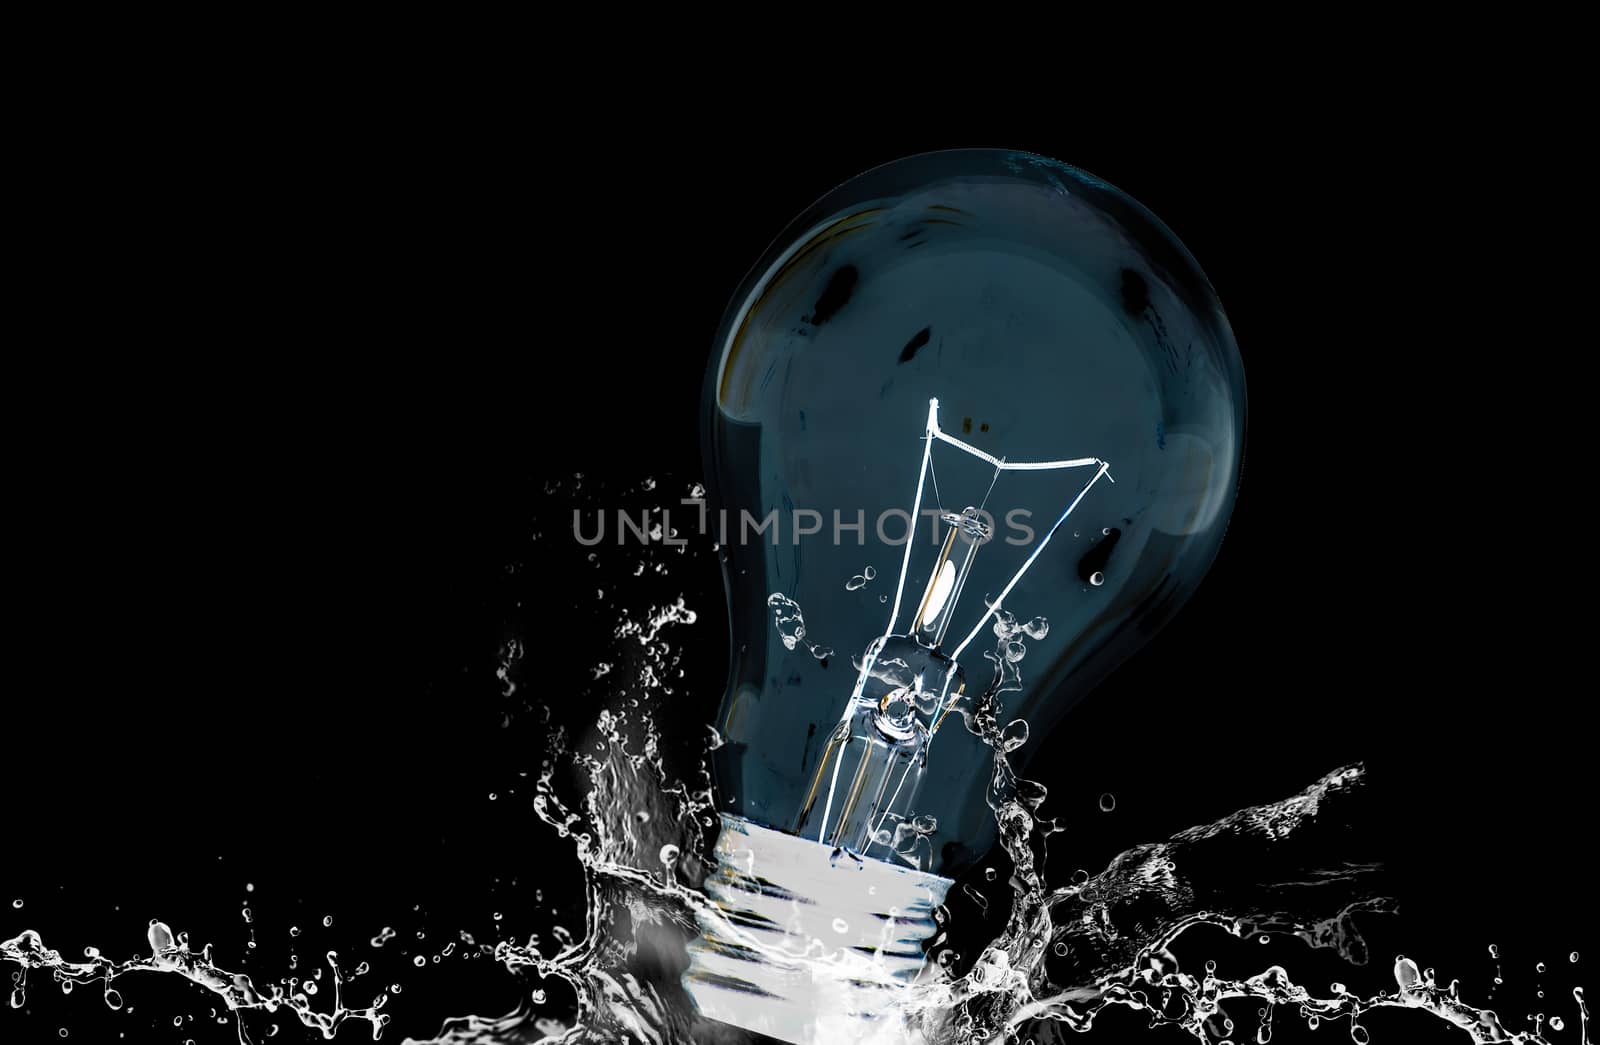 The lamp fell into the water. And a black background.